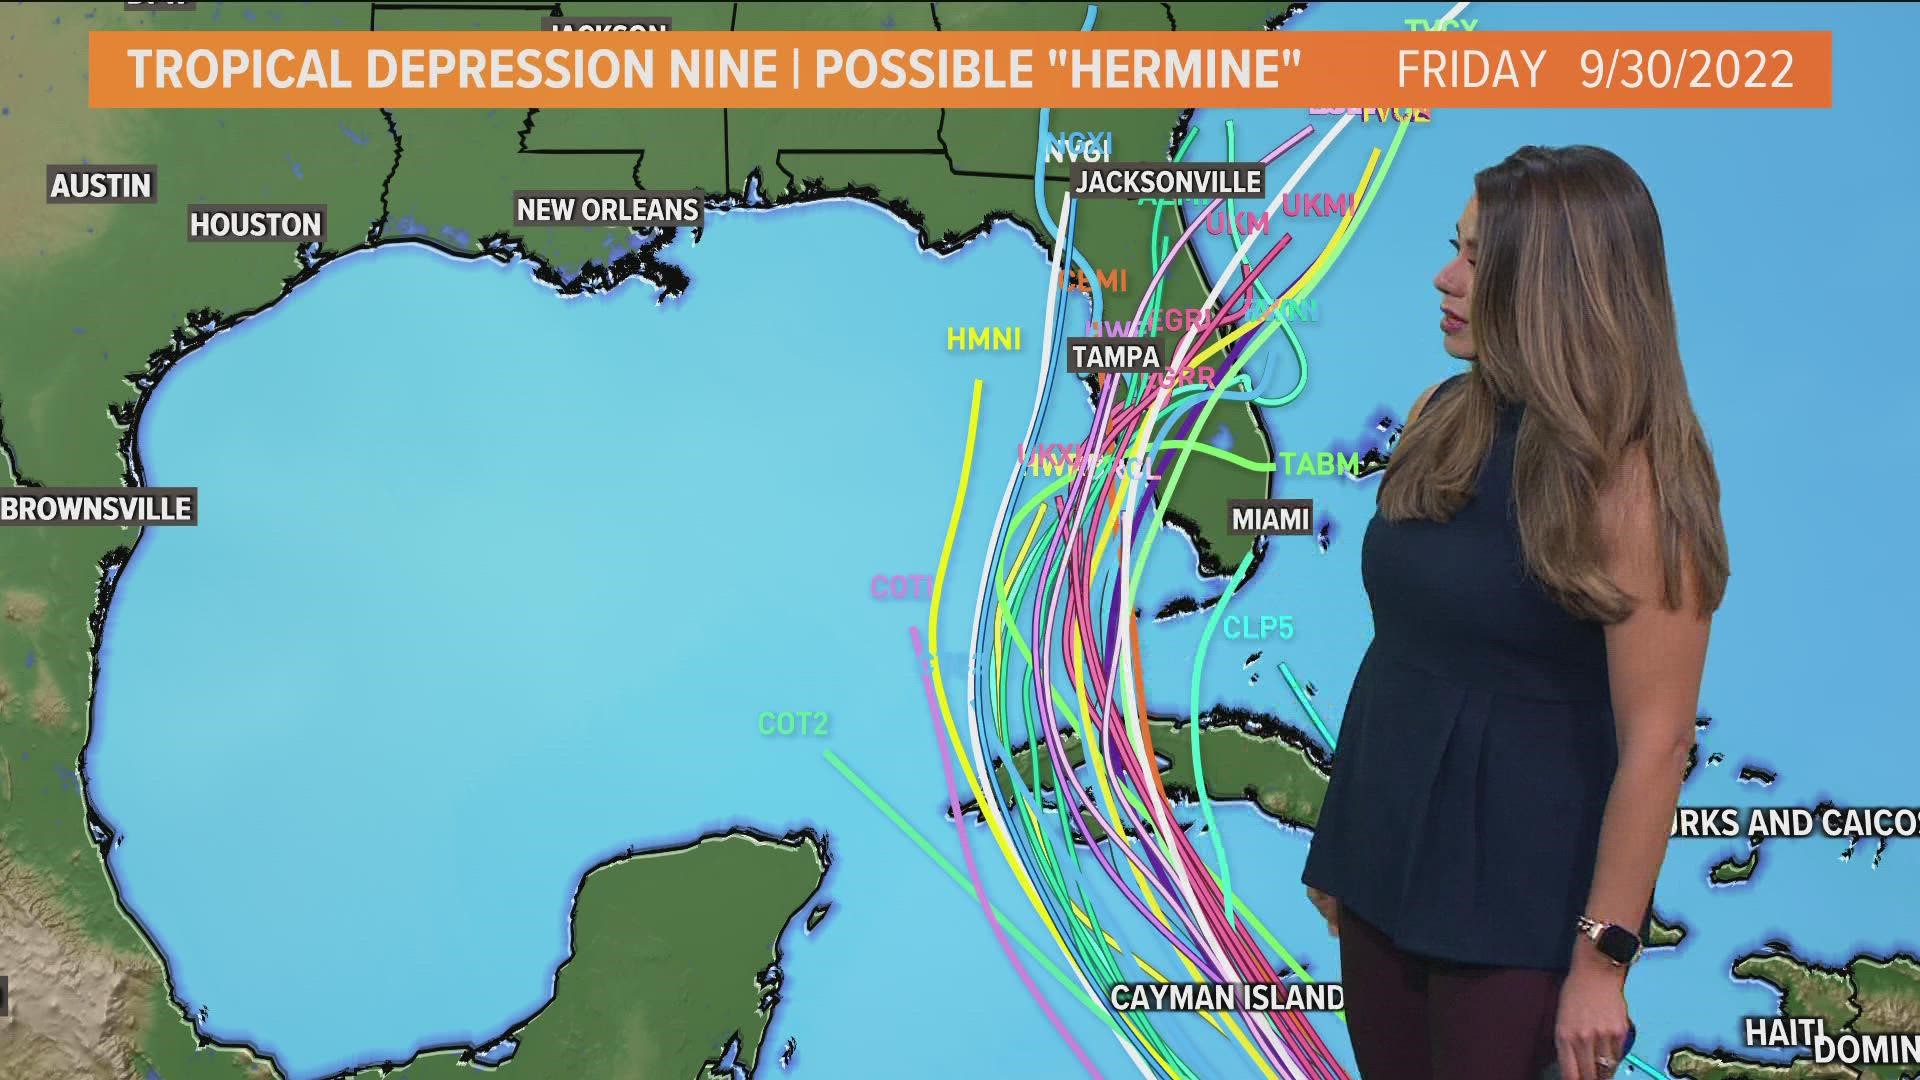 TD Nine could become the first named Gulf storm of the season.